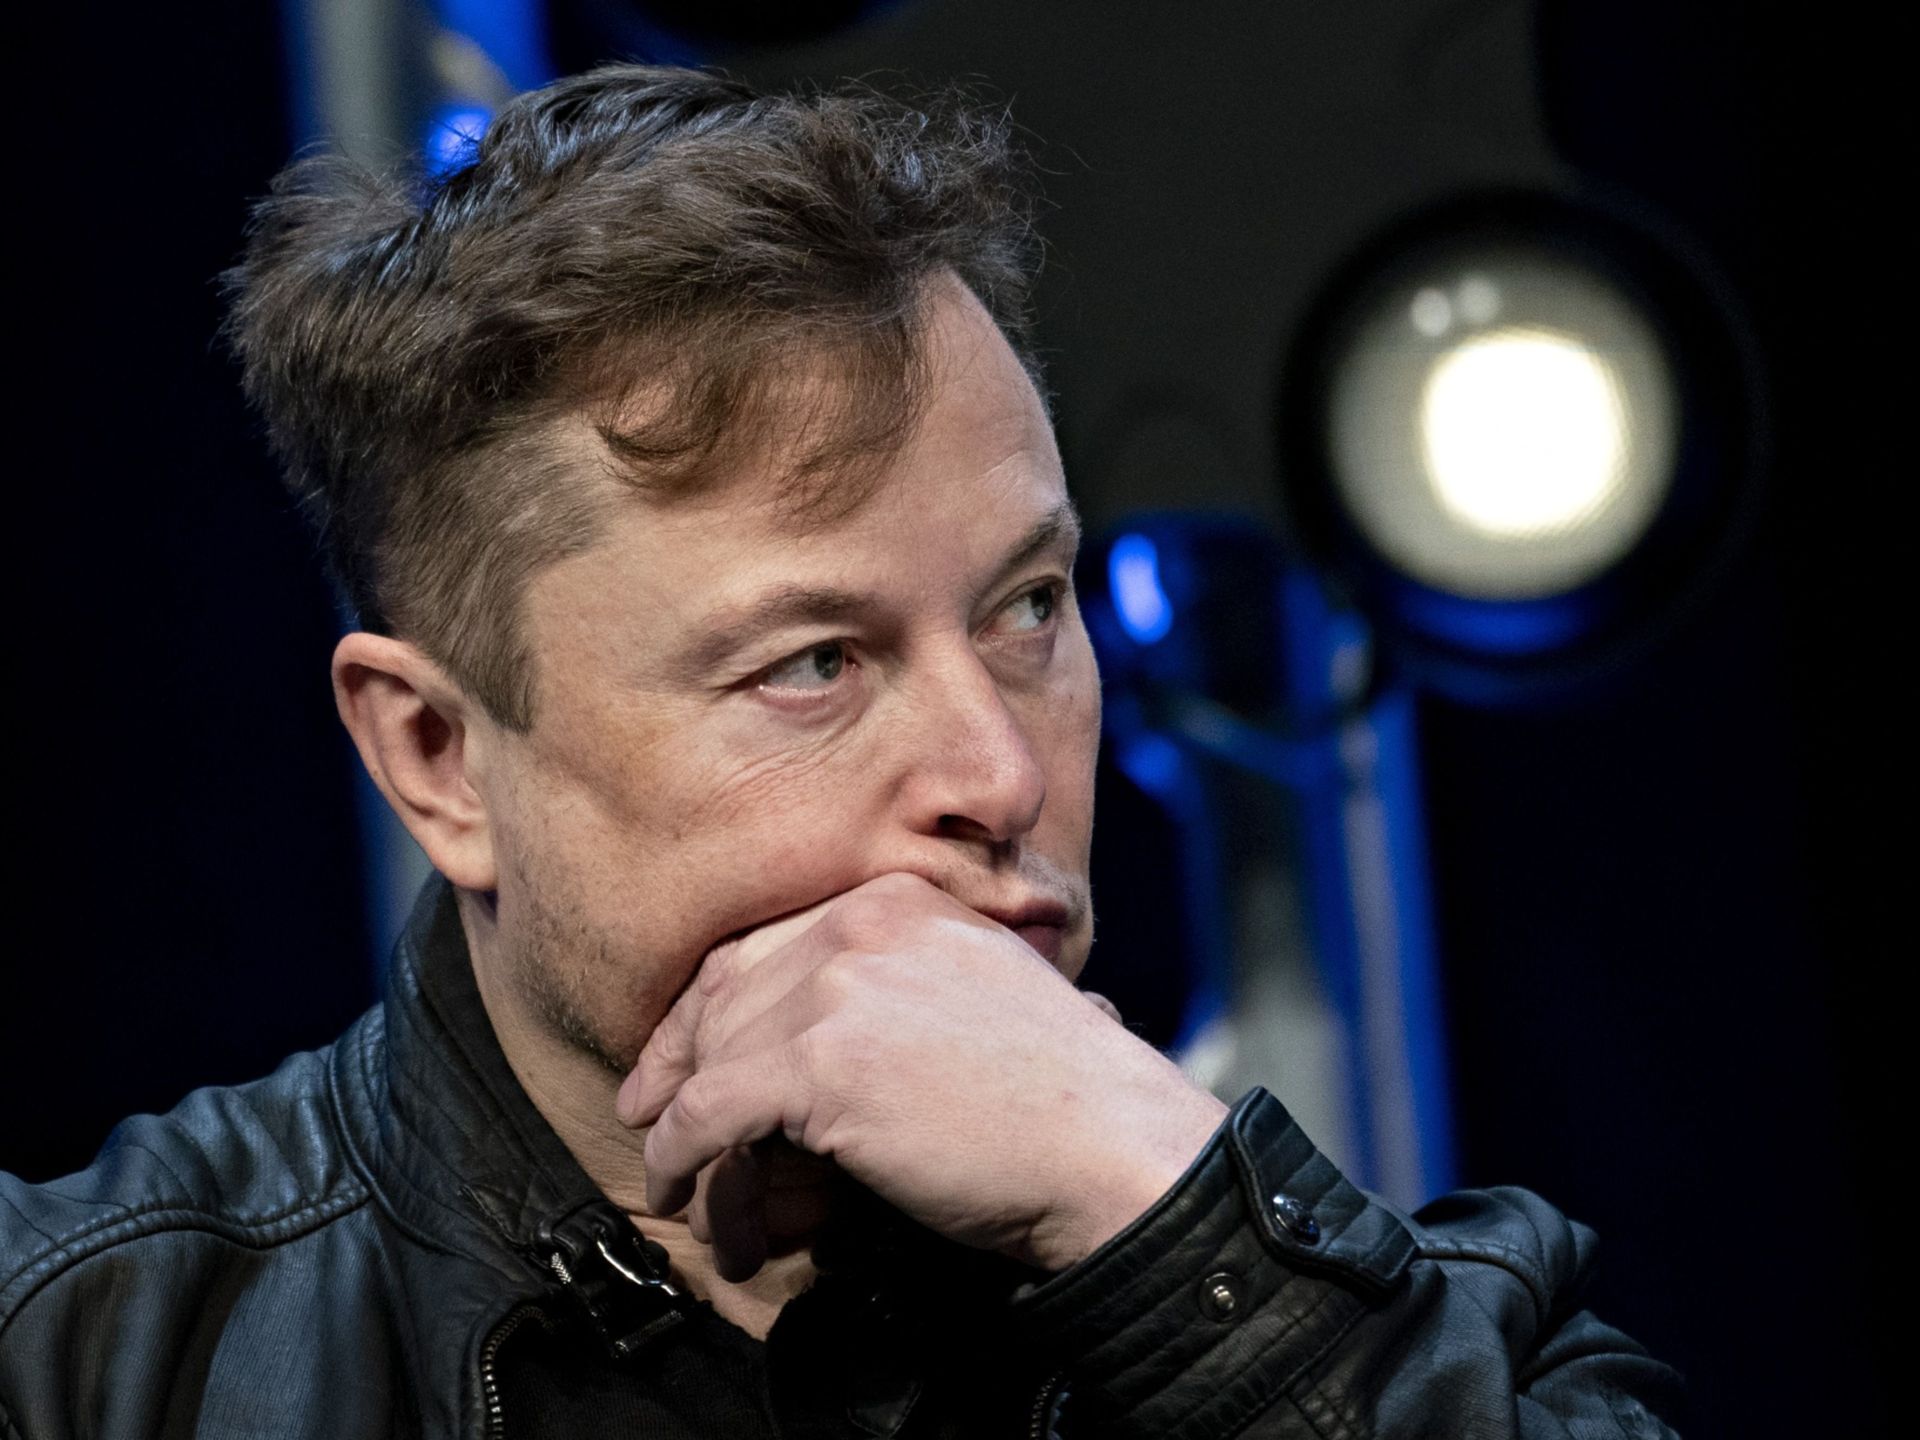 Musk pledges to remove Twitter imposters after celebrity protests | Technology